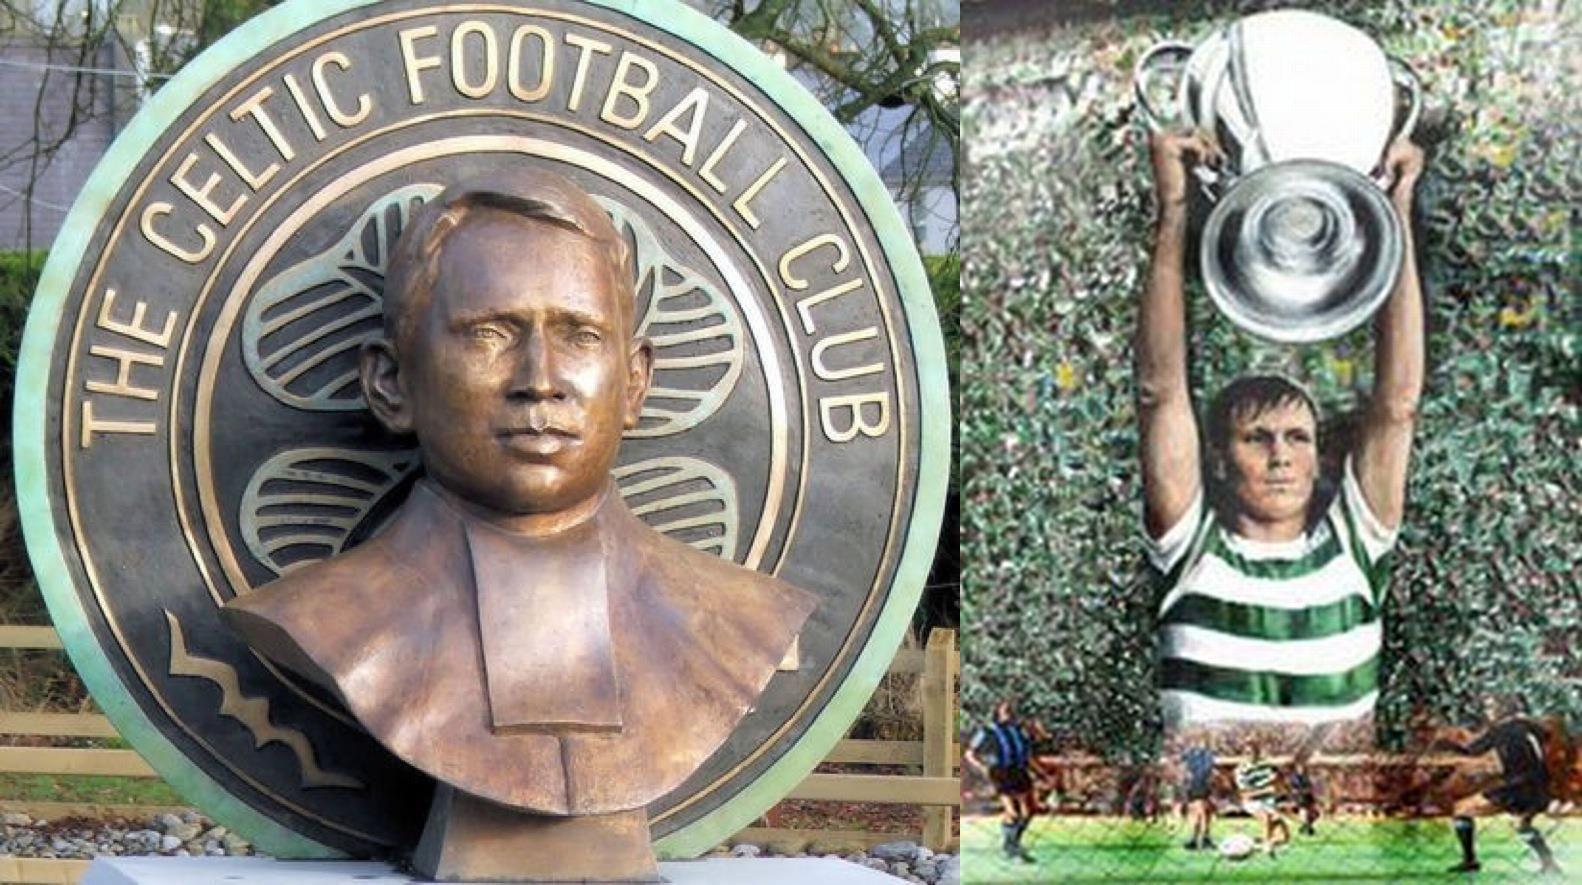 The Founding of Celtic Football Club 1888